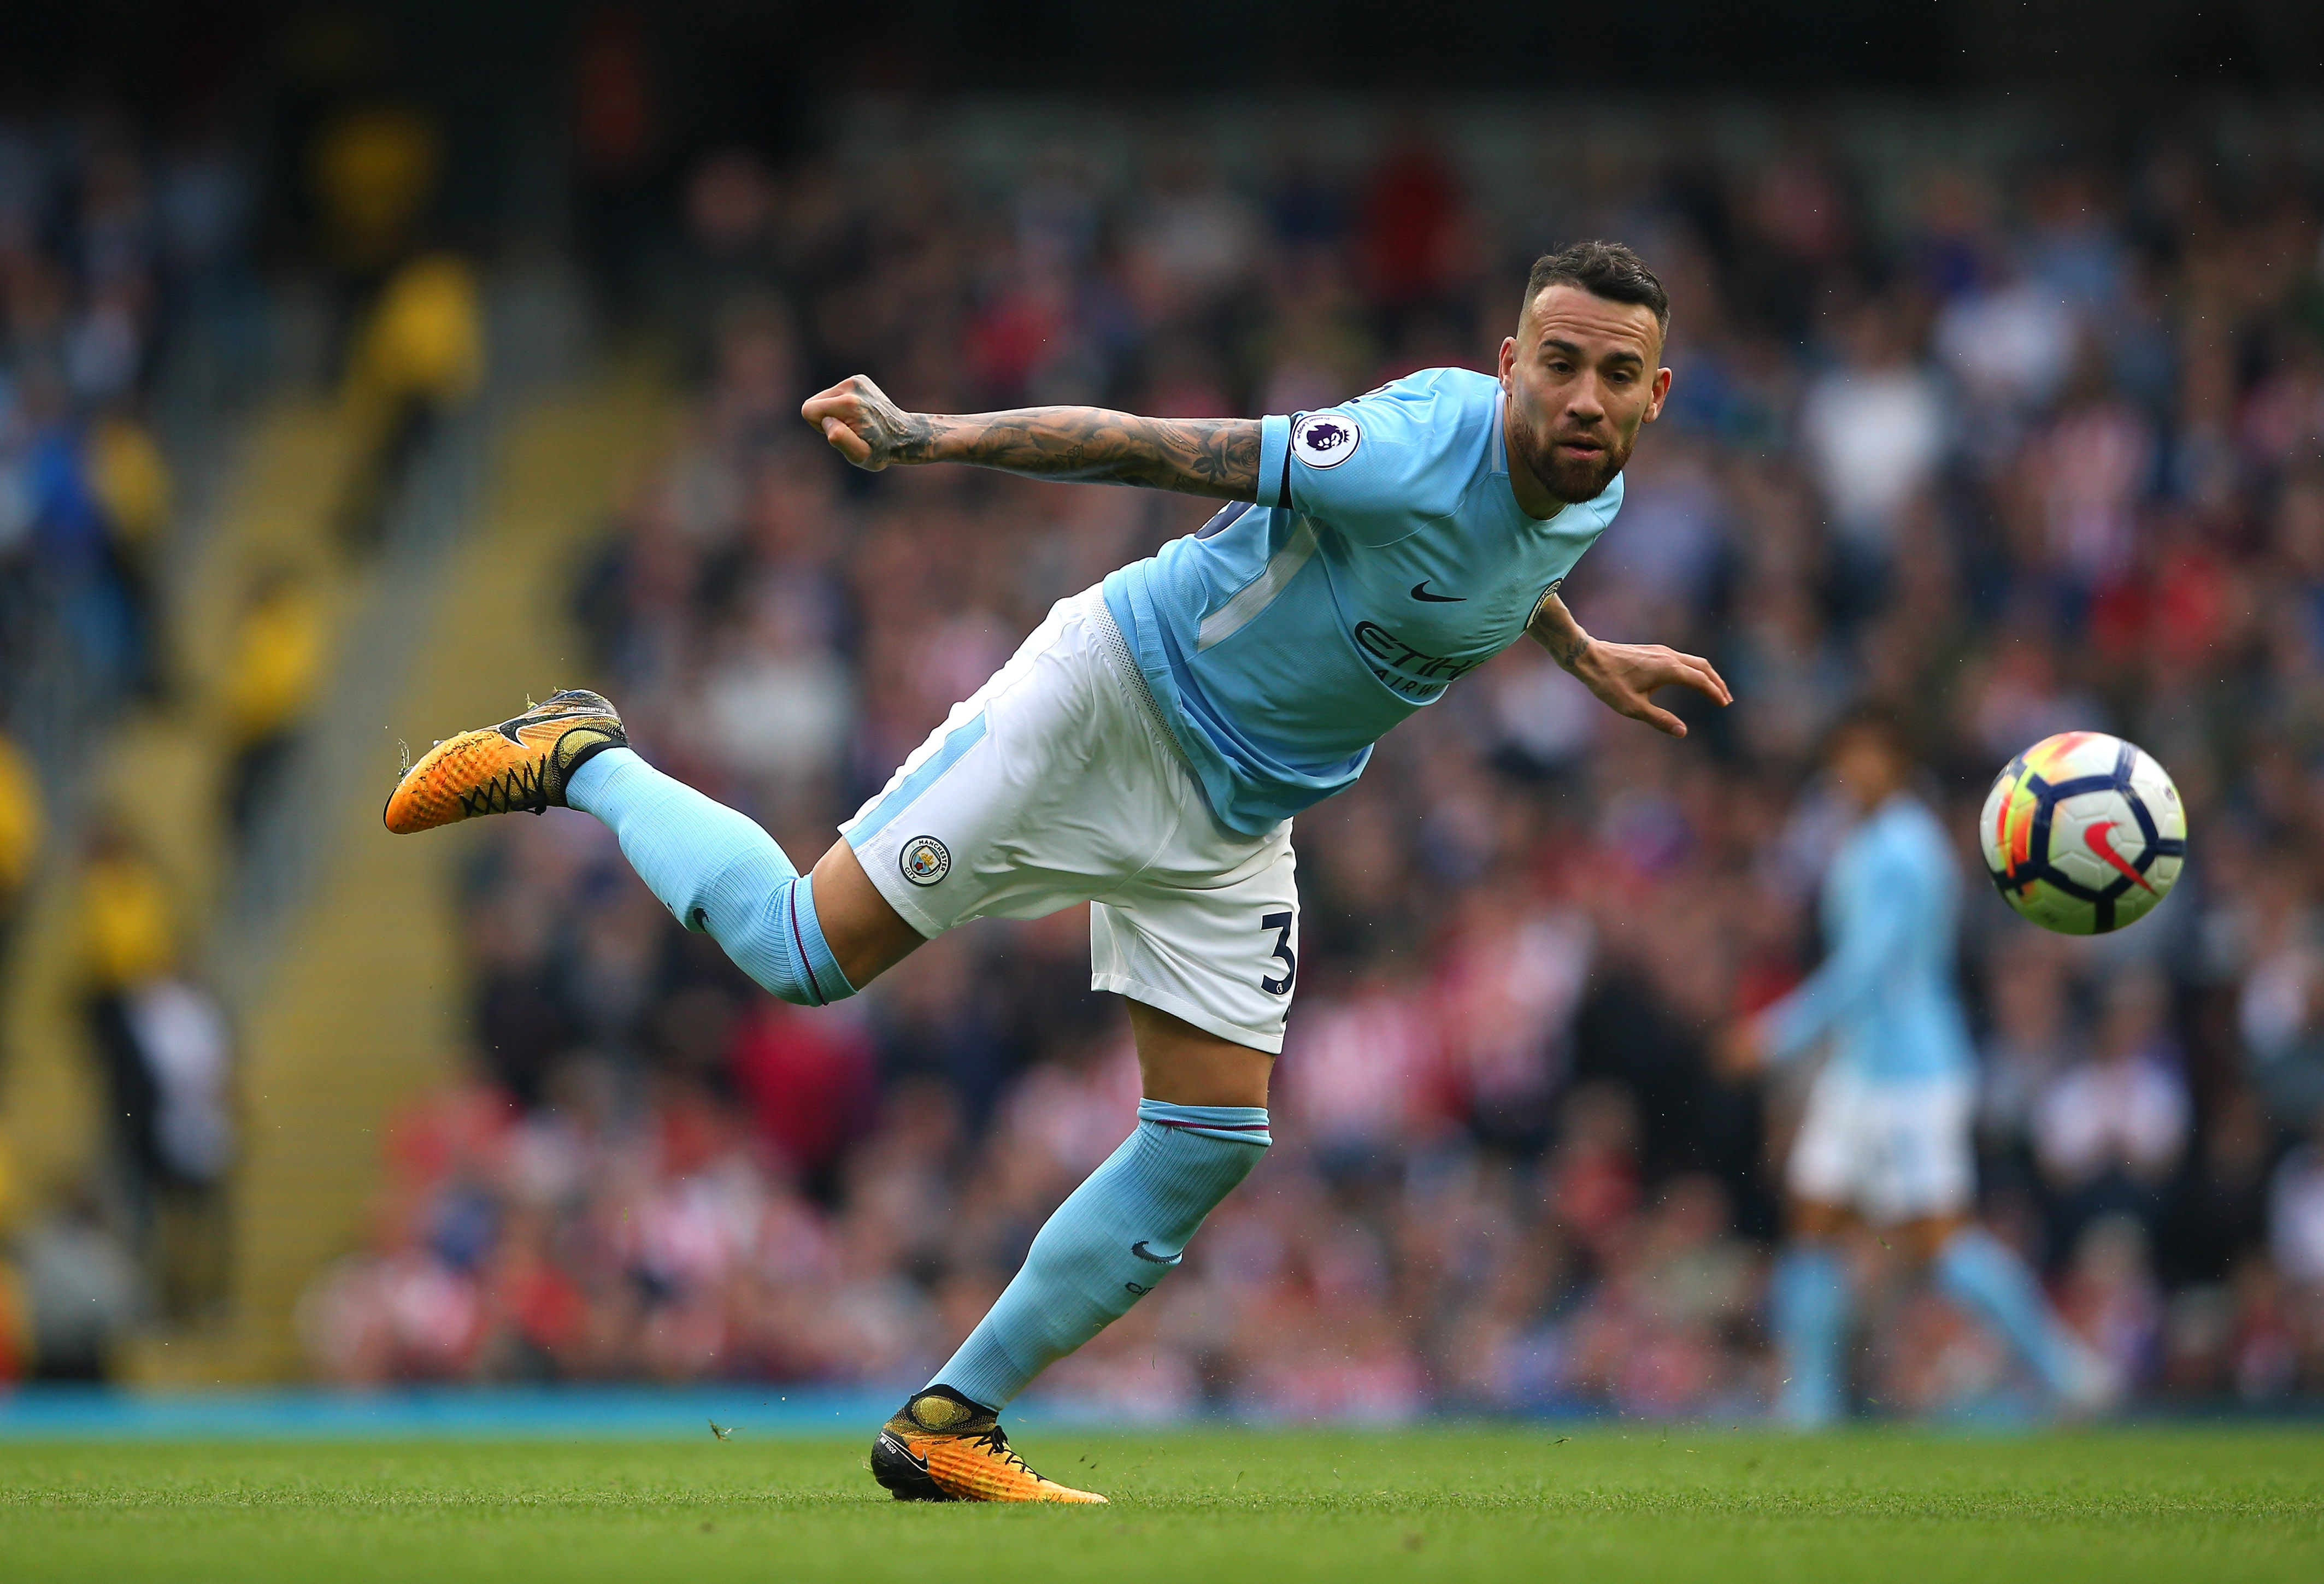 MANCHESTER, ENGLAND - OCTOBER 14:  Nicolas Otamendi of Manchester City during the Premier League match between Manchester City and Stoke City at Etihad Stadium on October 14, 2017 in Manchester, England.  (Photo by Alex Livesey/Getty Images)